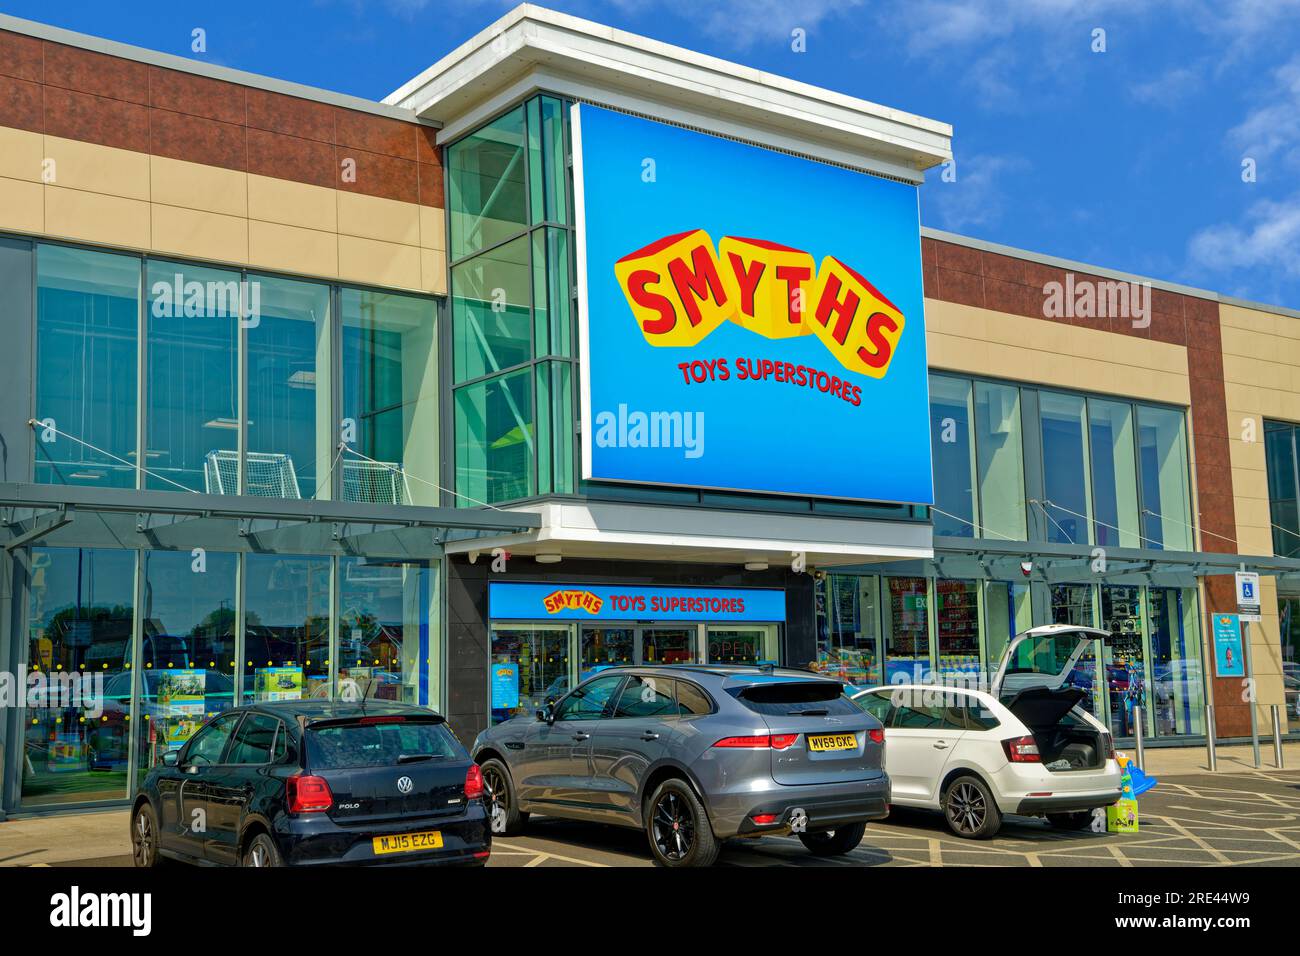 28 Smyths Toys Stock Photos, High-Res Pictures, and Images - Getty Images